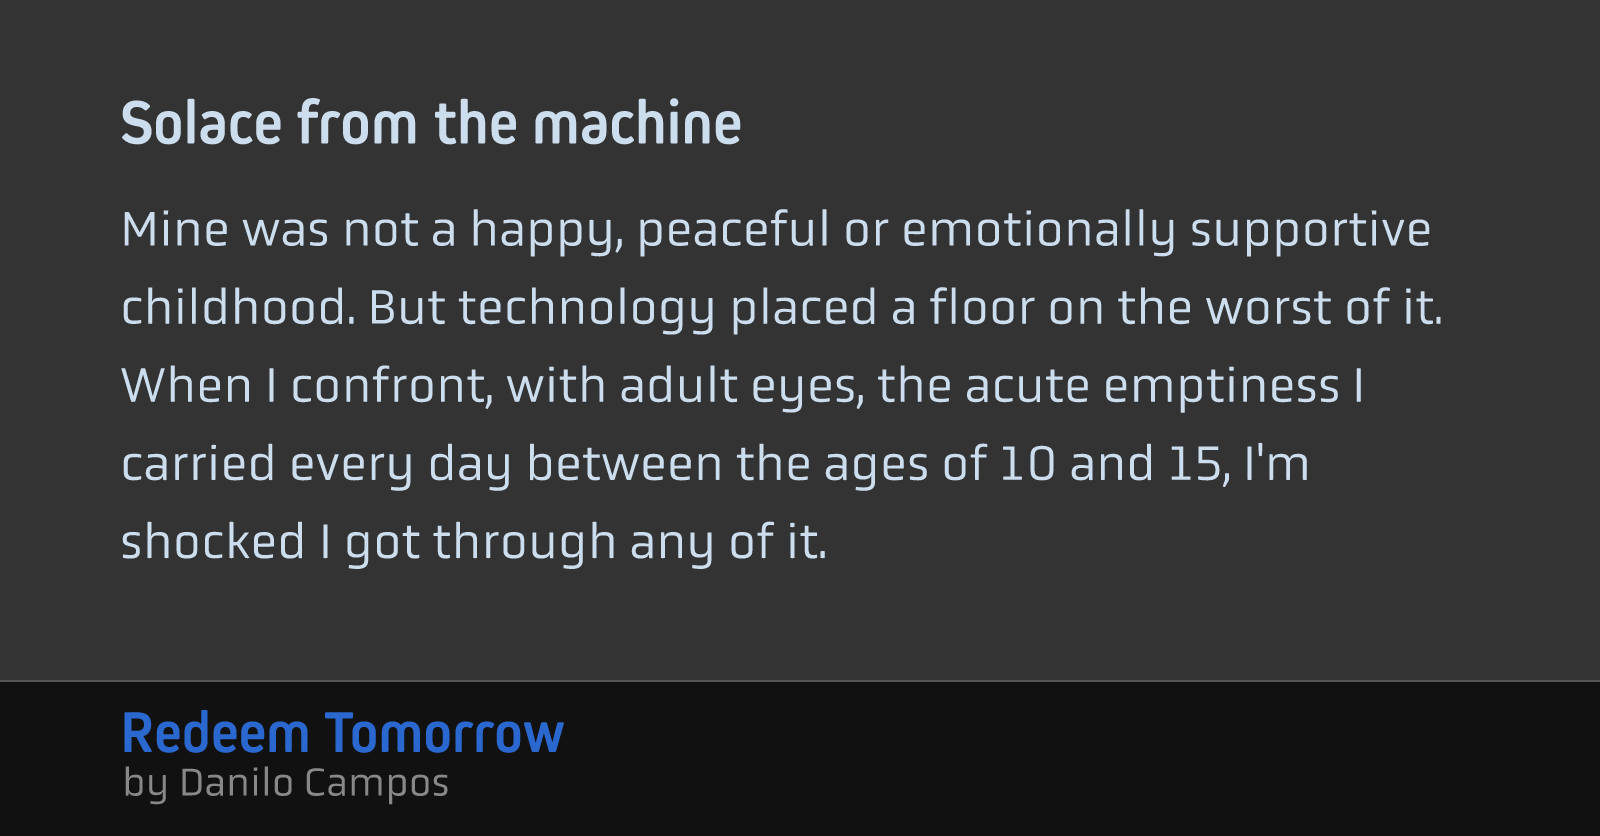 Solace from the machine